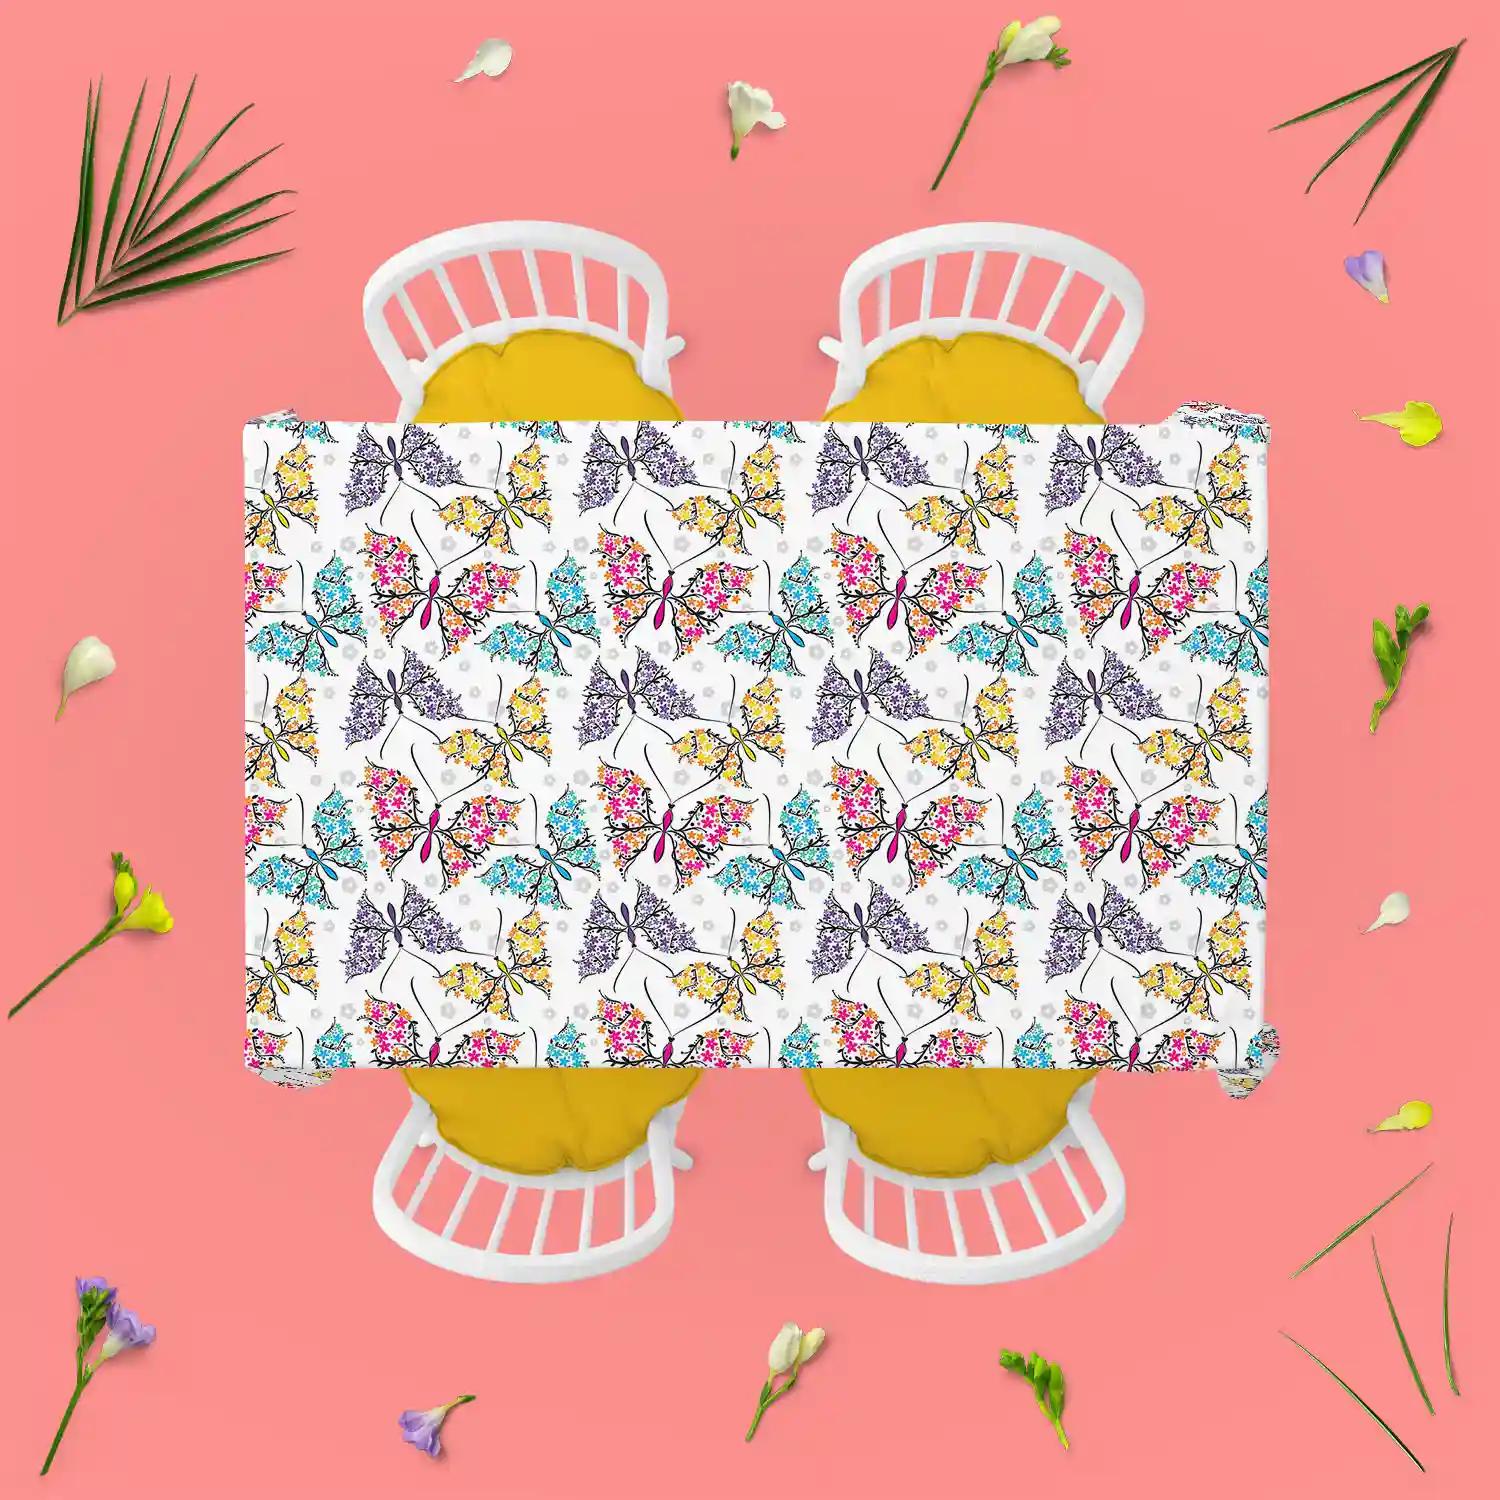 ArtzFolio Cute Butterflies | Table Cloth Cover for Dining & Center Table